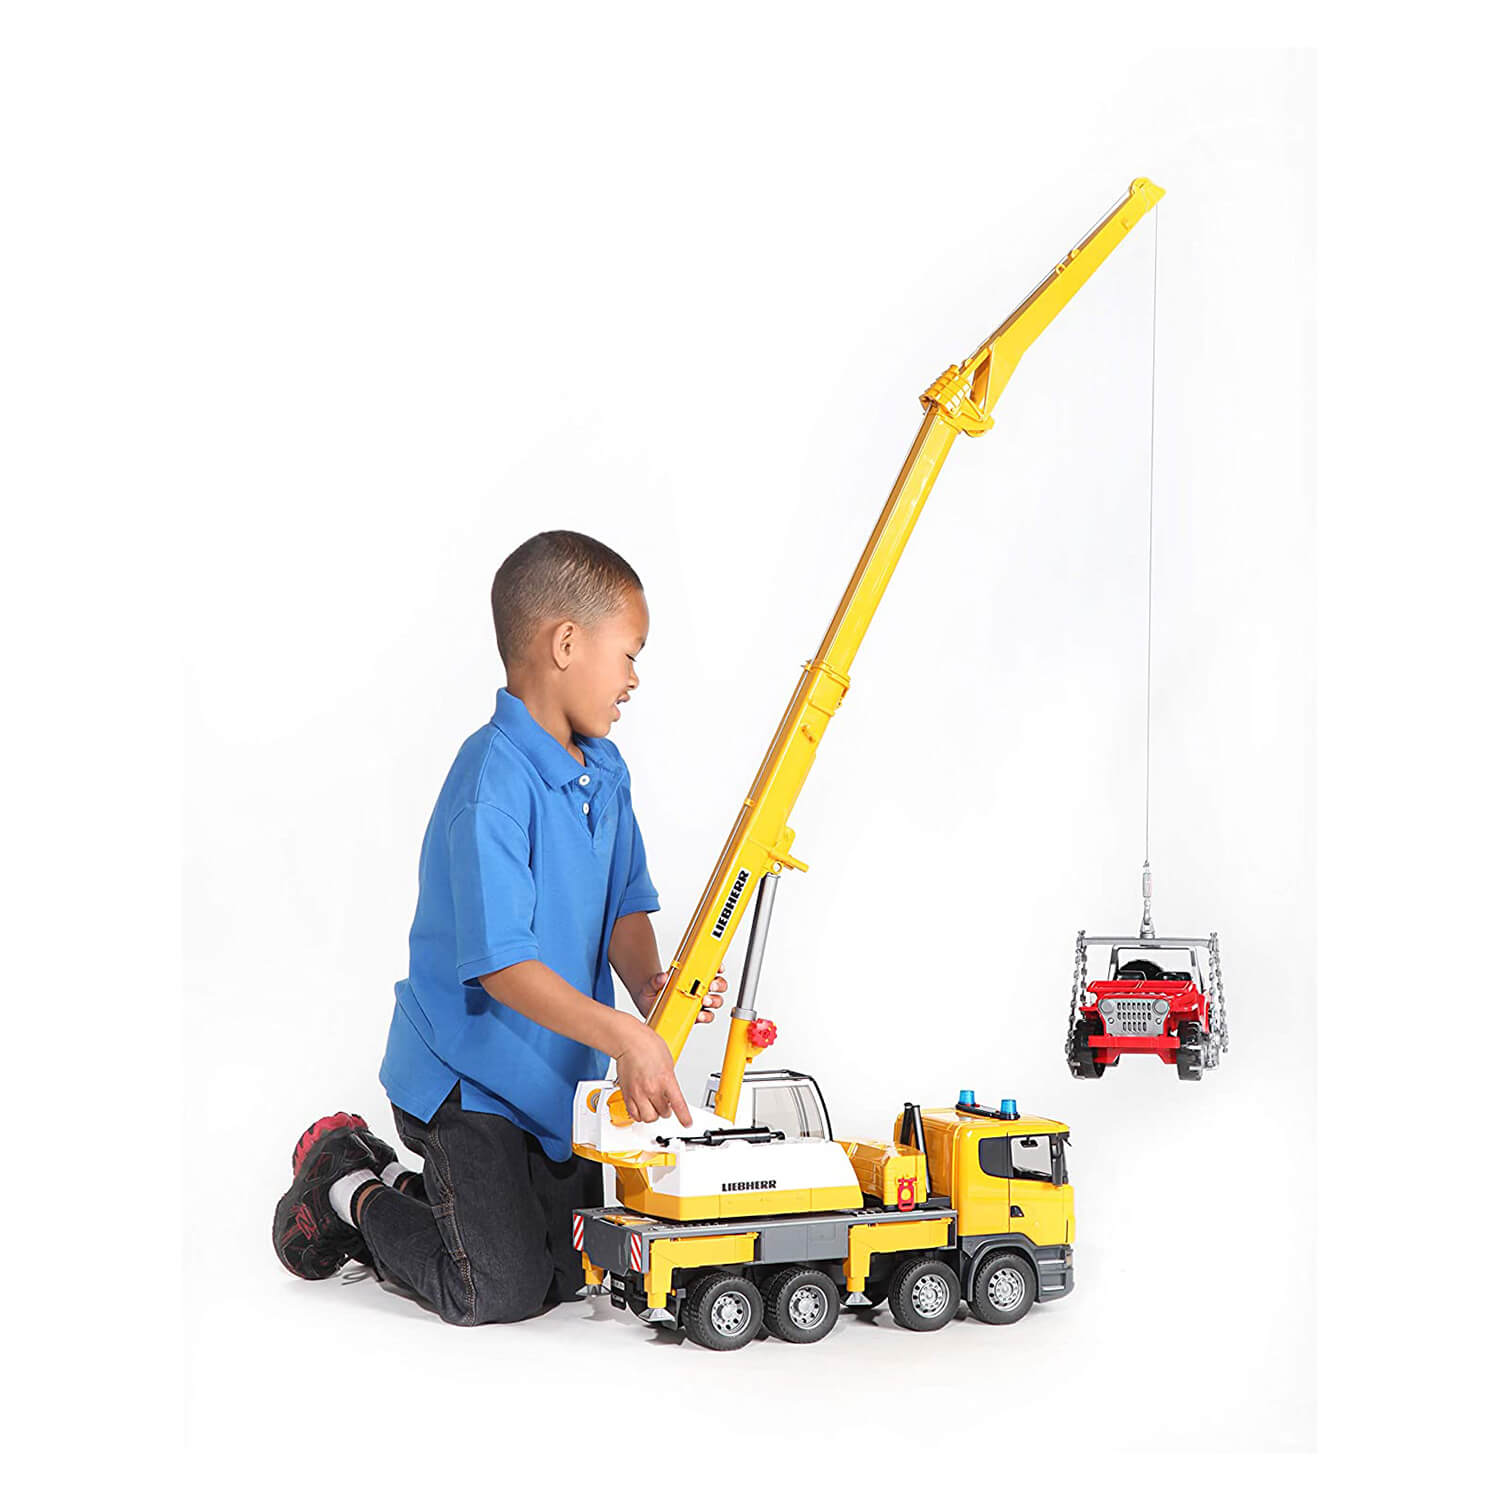 Kid playing with the crane toy.